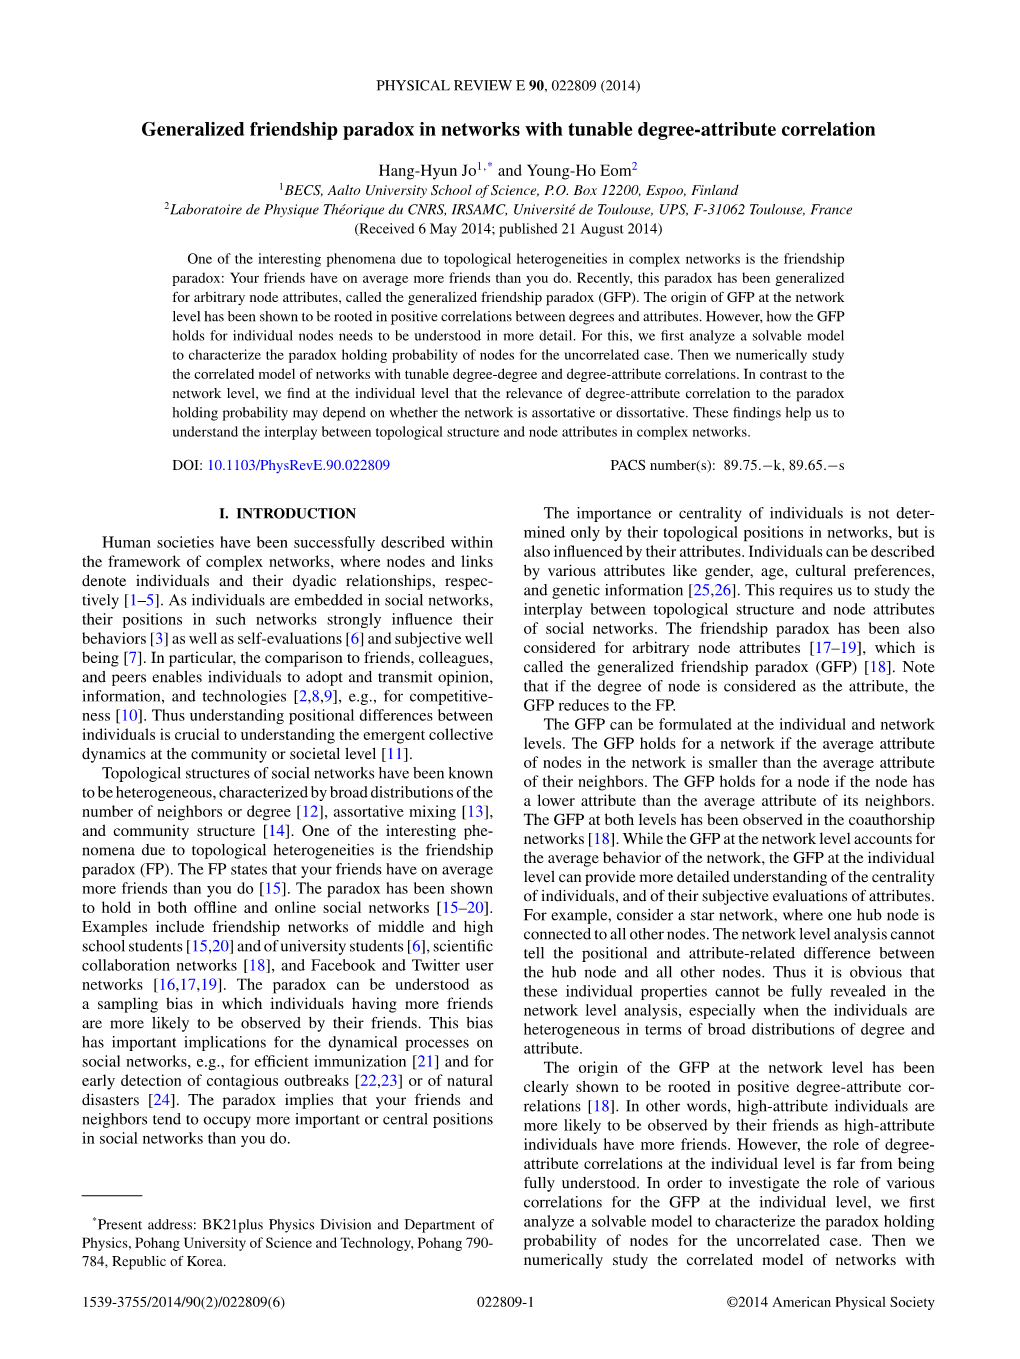 Generalized Friendship Paradox in Networks with Tunable Degree-Attribute Correlation